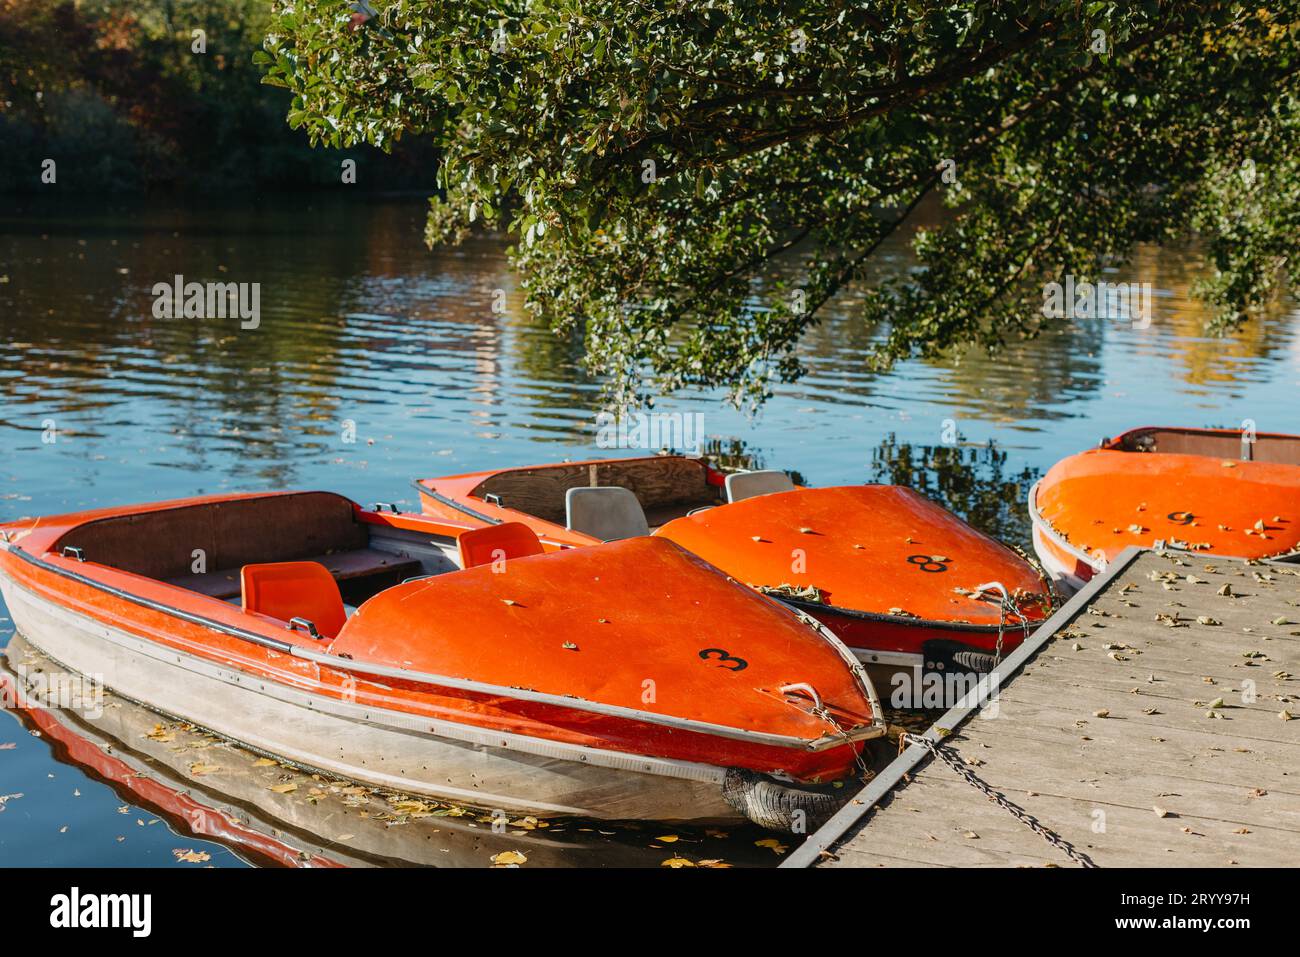 Several boats with oars are moored at the water's edge at the pier in the city park for water walks on the river, lake or pond. Stock Photo